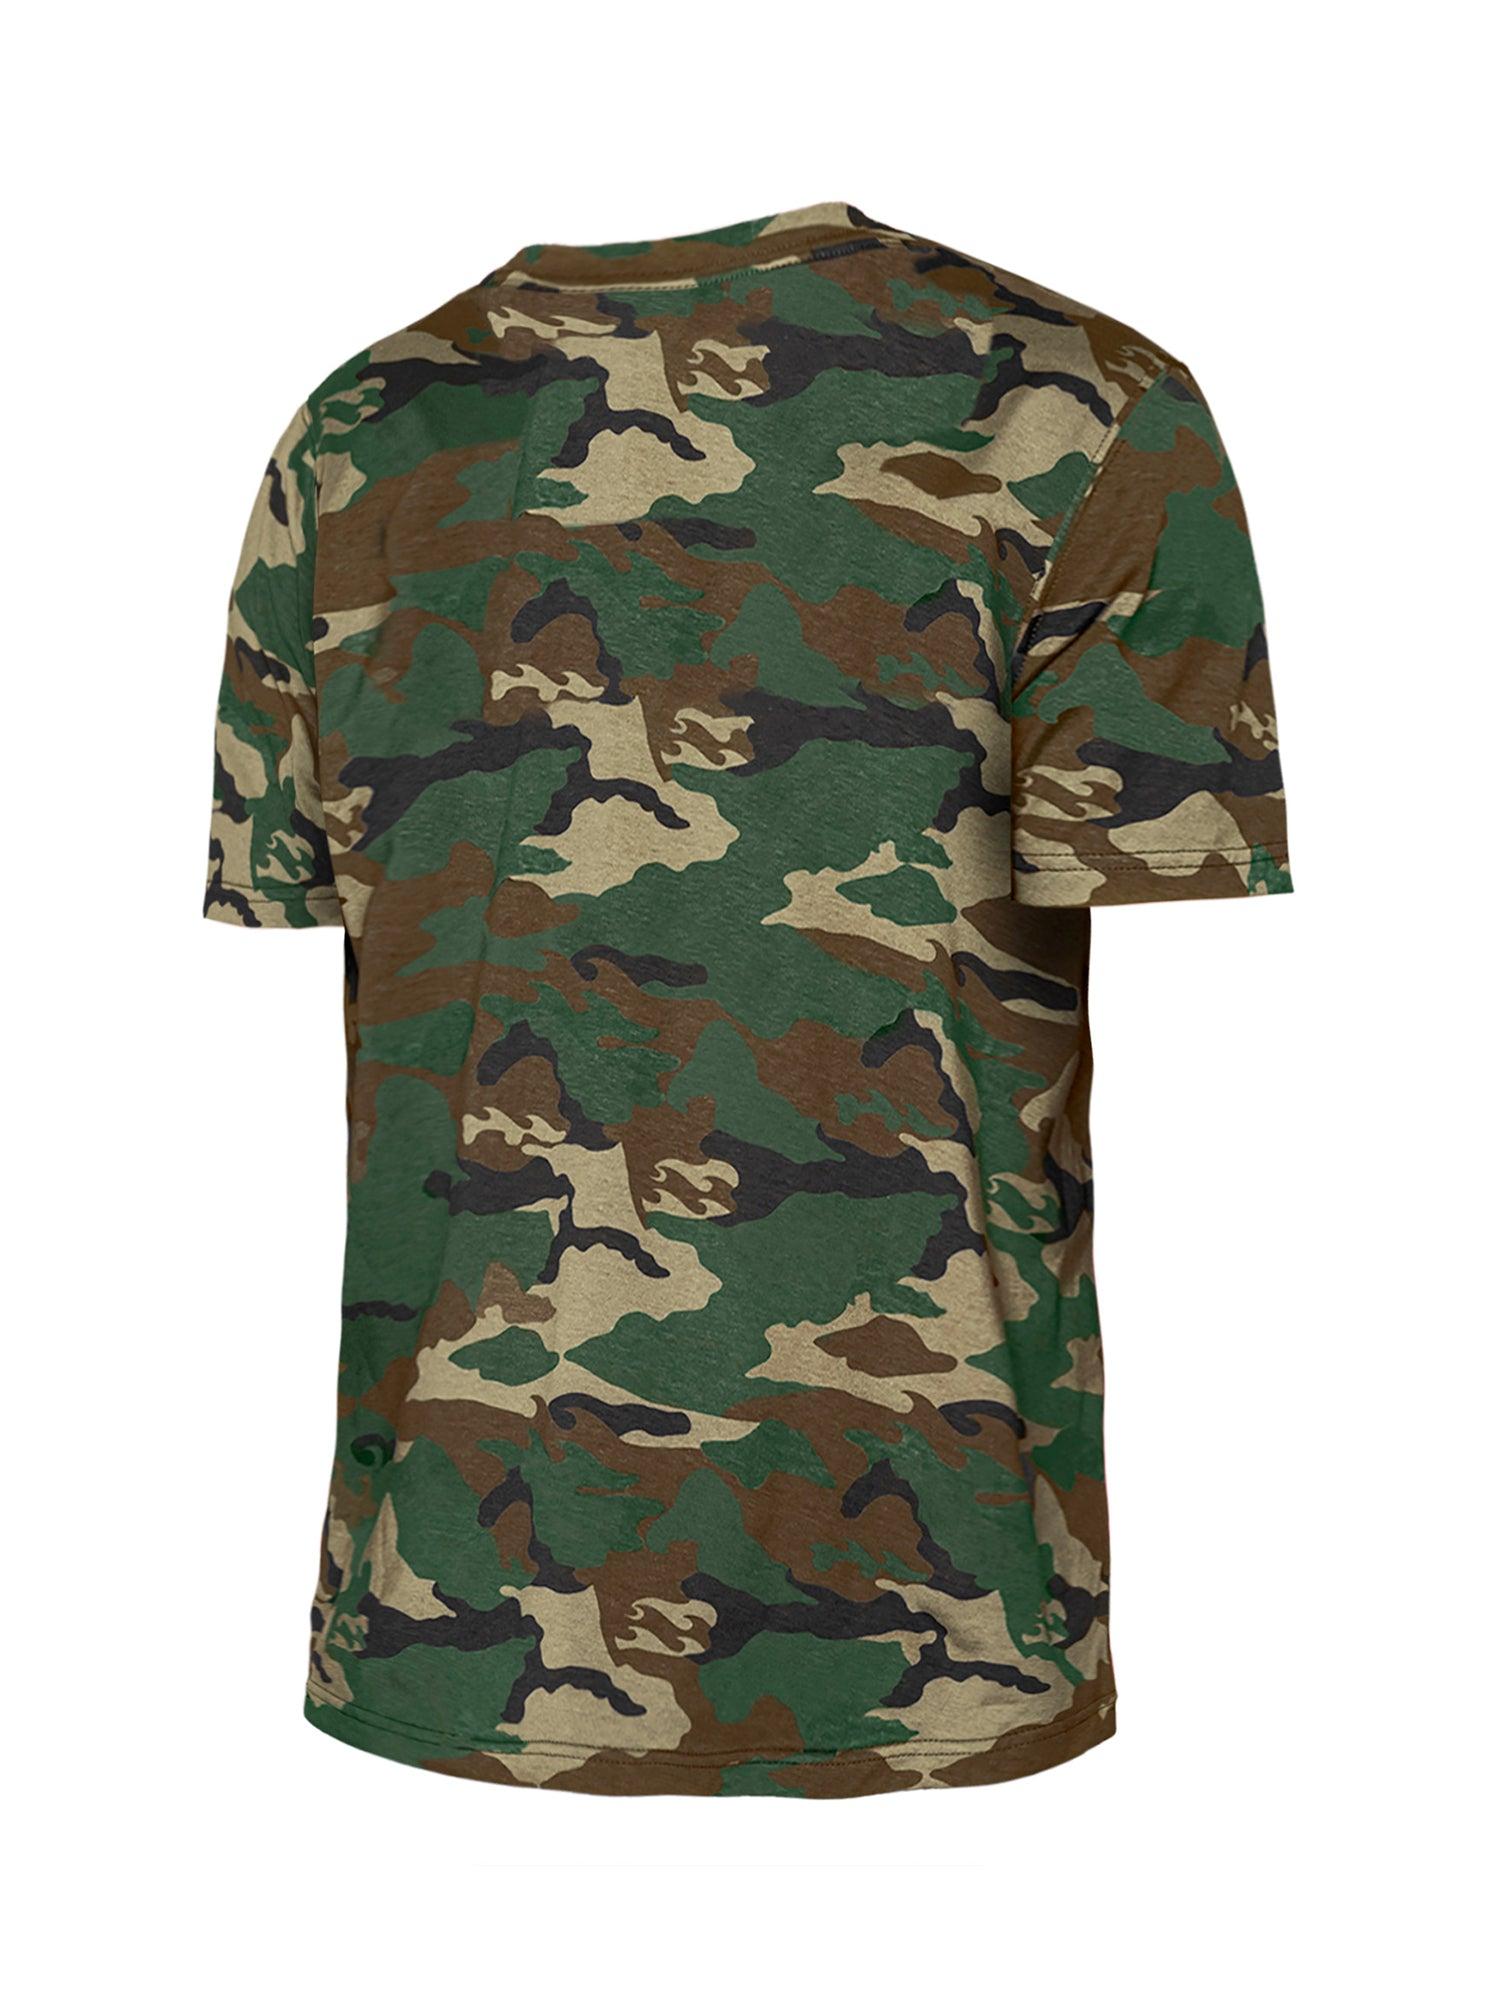 Pittsburgh Pirates New Era Armed Special Forces Camo Pocket T-Shirt - Black